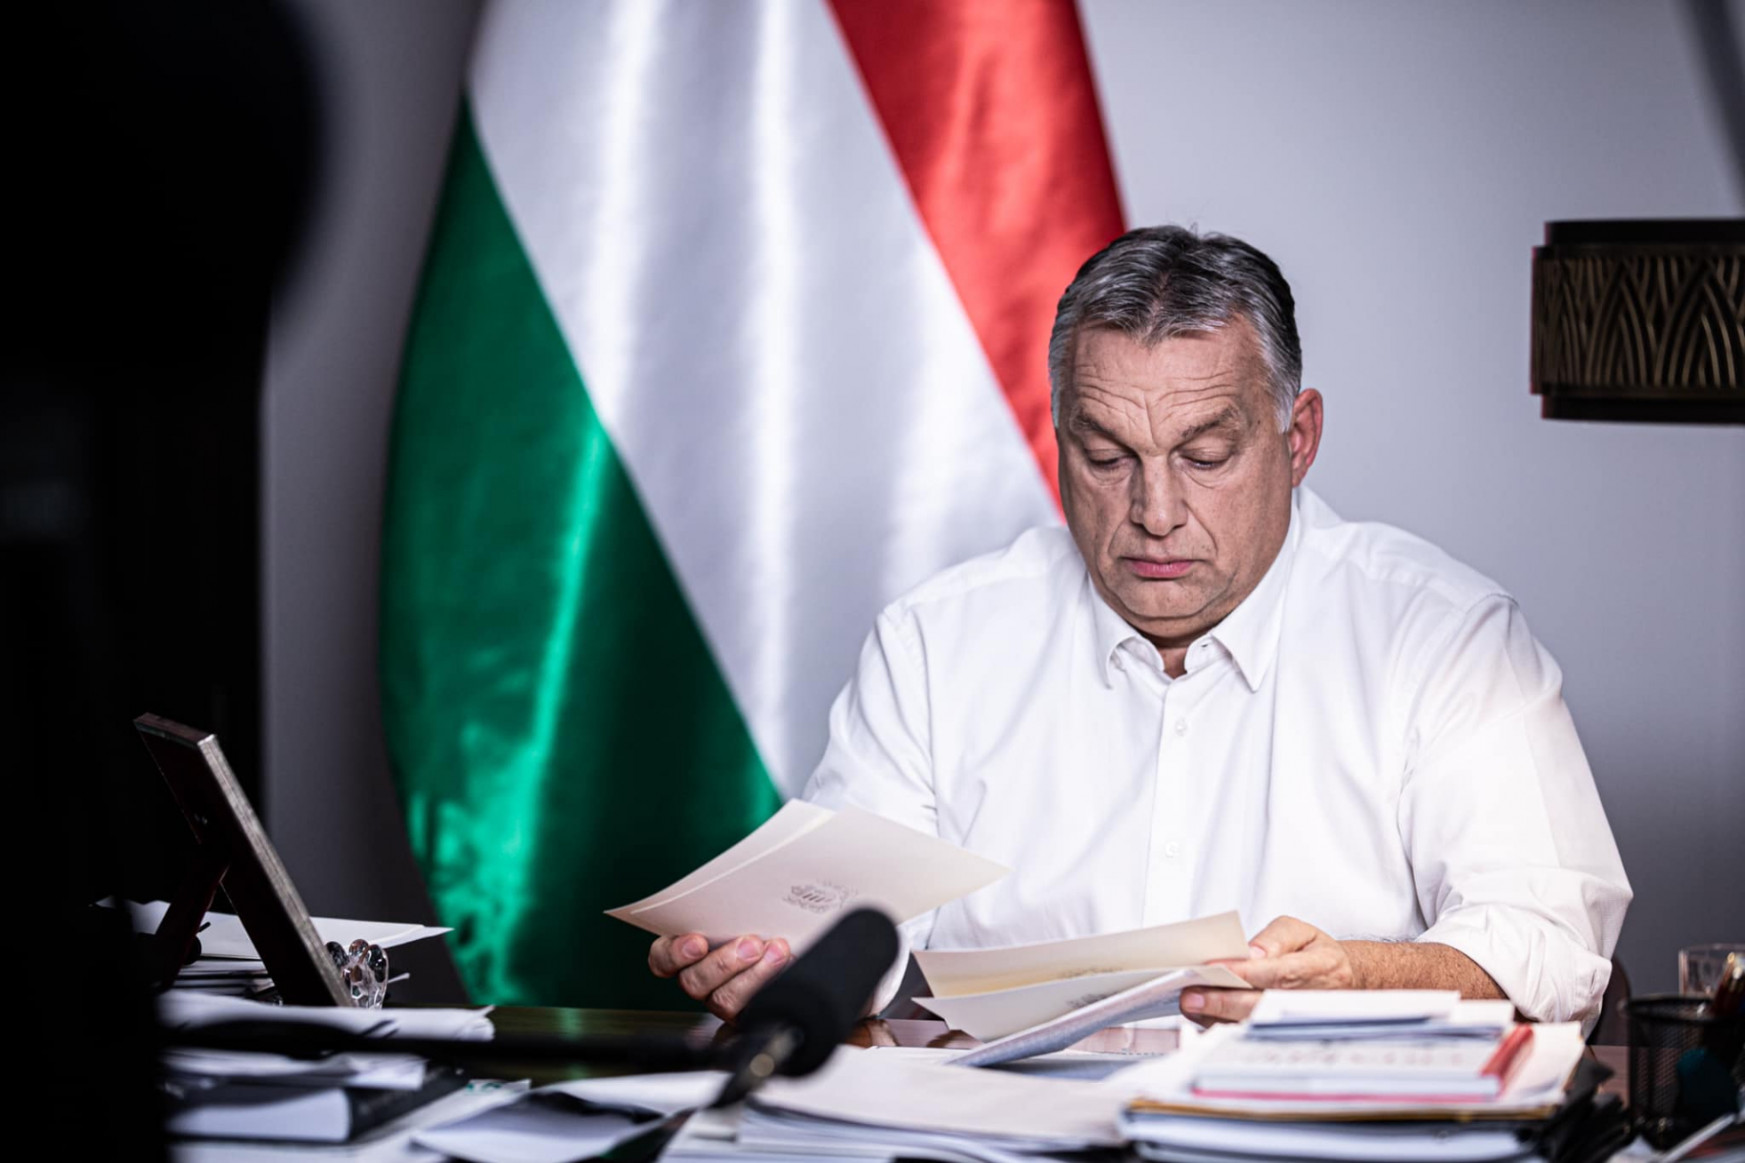 Hungary introduces curfew and special legal order over COVID-19